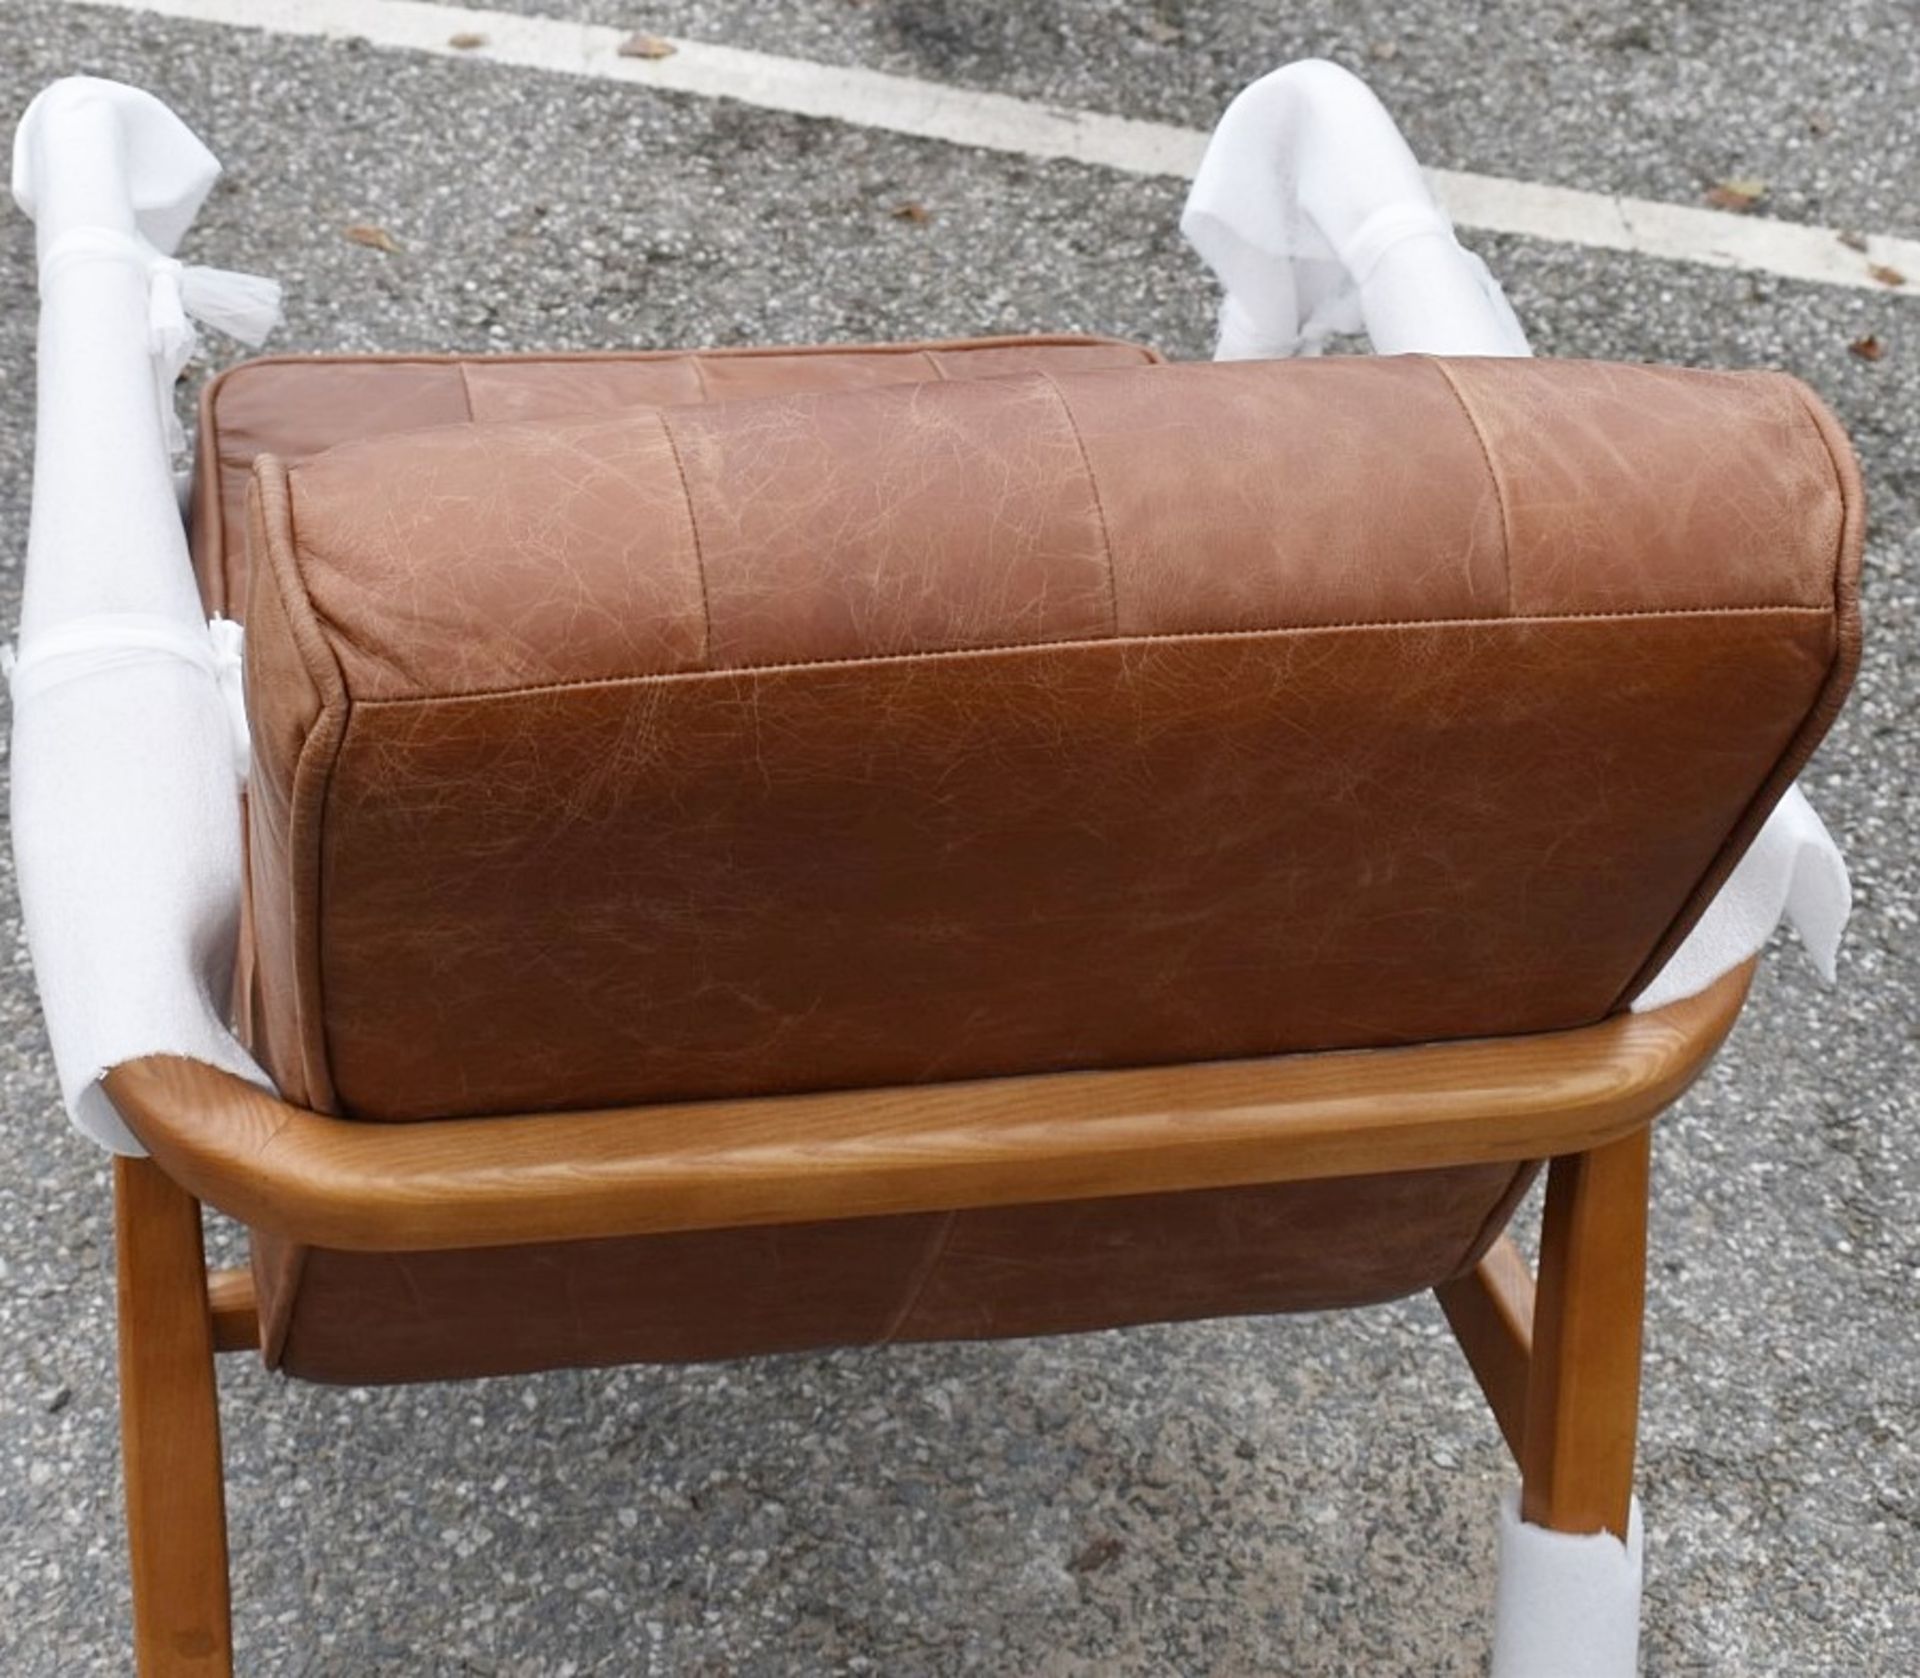 1 x 'Humber' Armchair Upholstered Vintage Brown Leather - New / Unused Stock - CL011 - Location: - Image 7 of 7